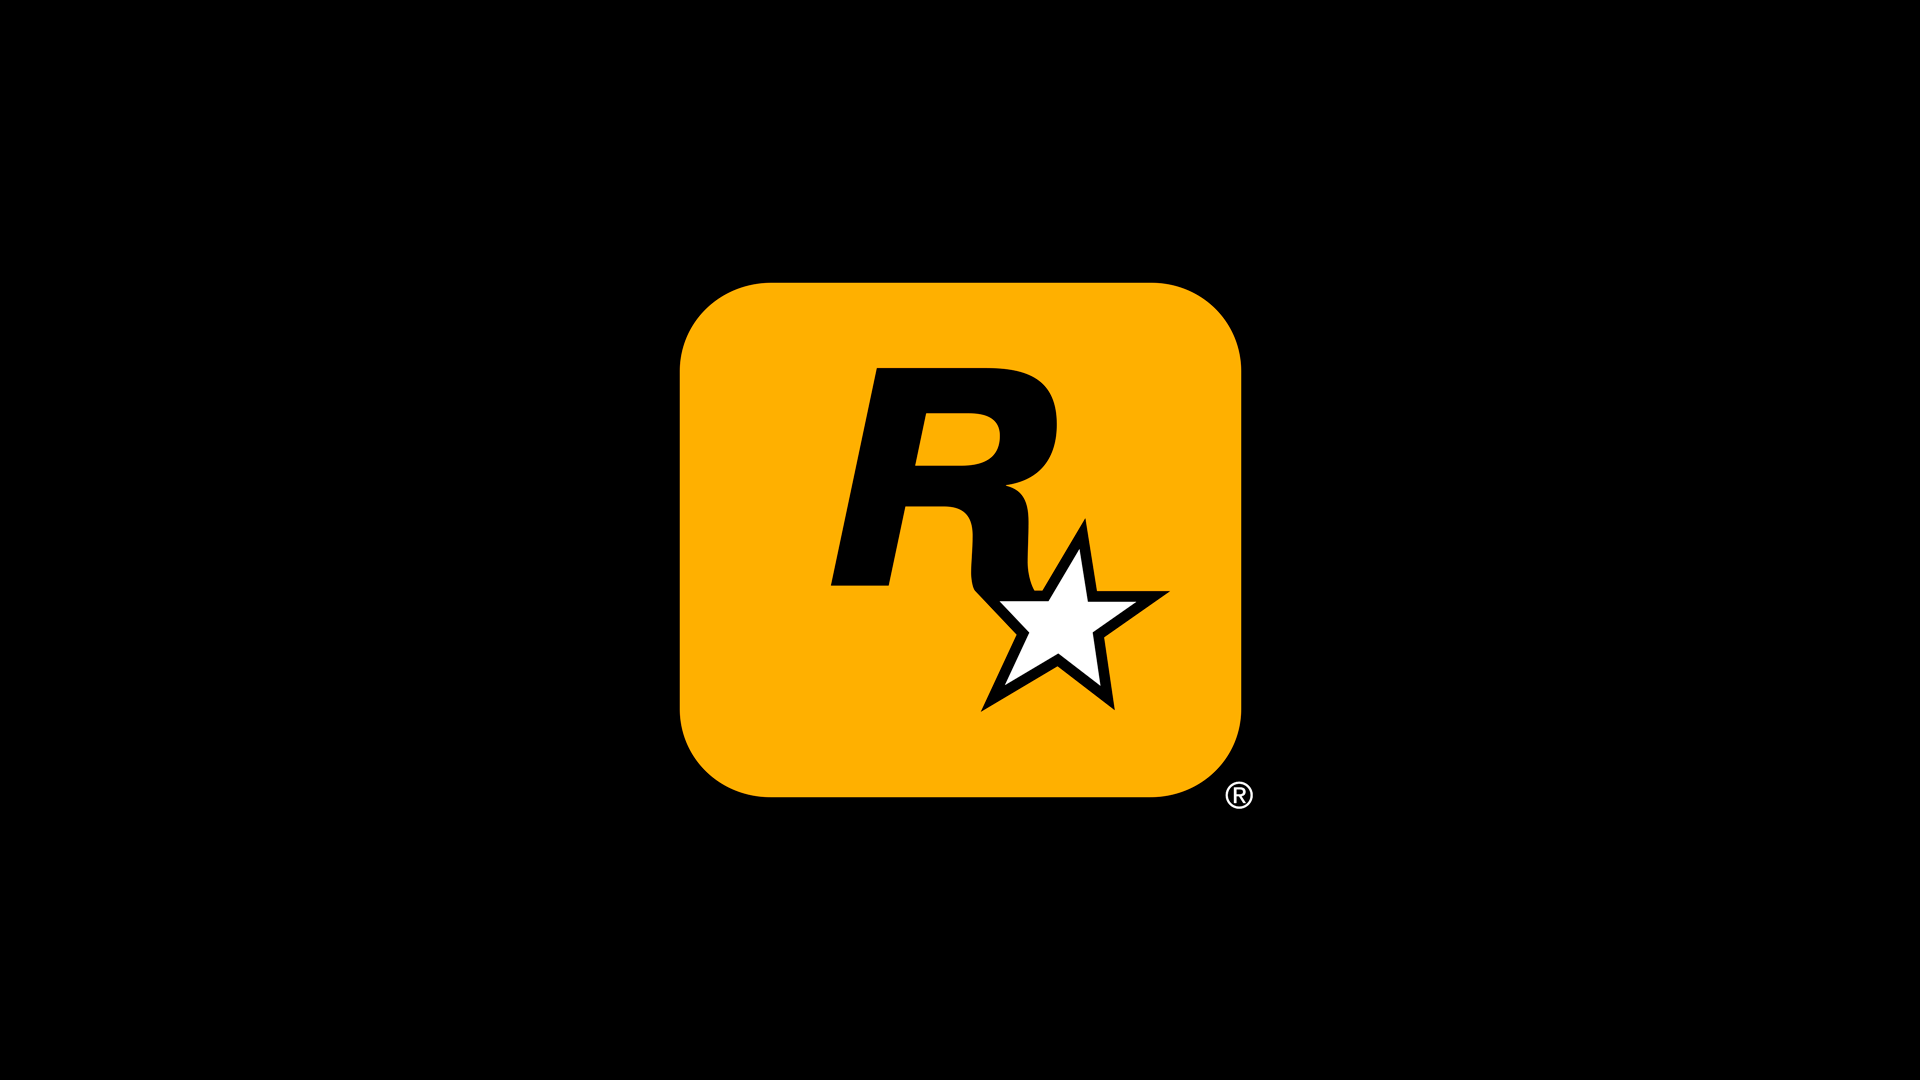 GTA 6: NEW 2023 Reveal! OFFICIAL Rockstar Statement & More Coming Soon?  Rumors Discussion (GTA VI) 